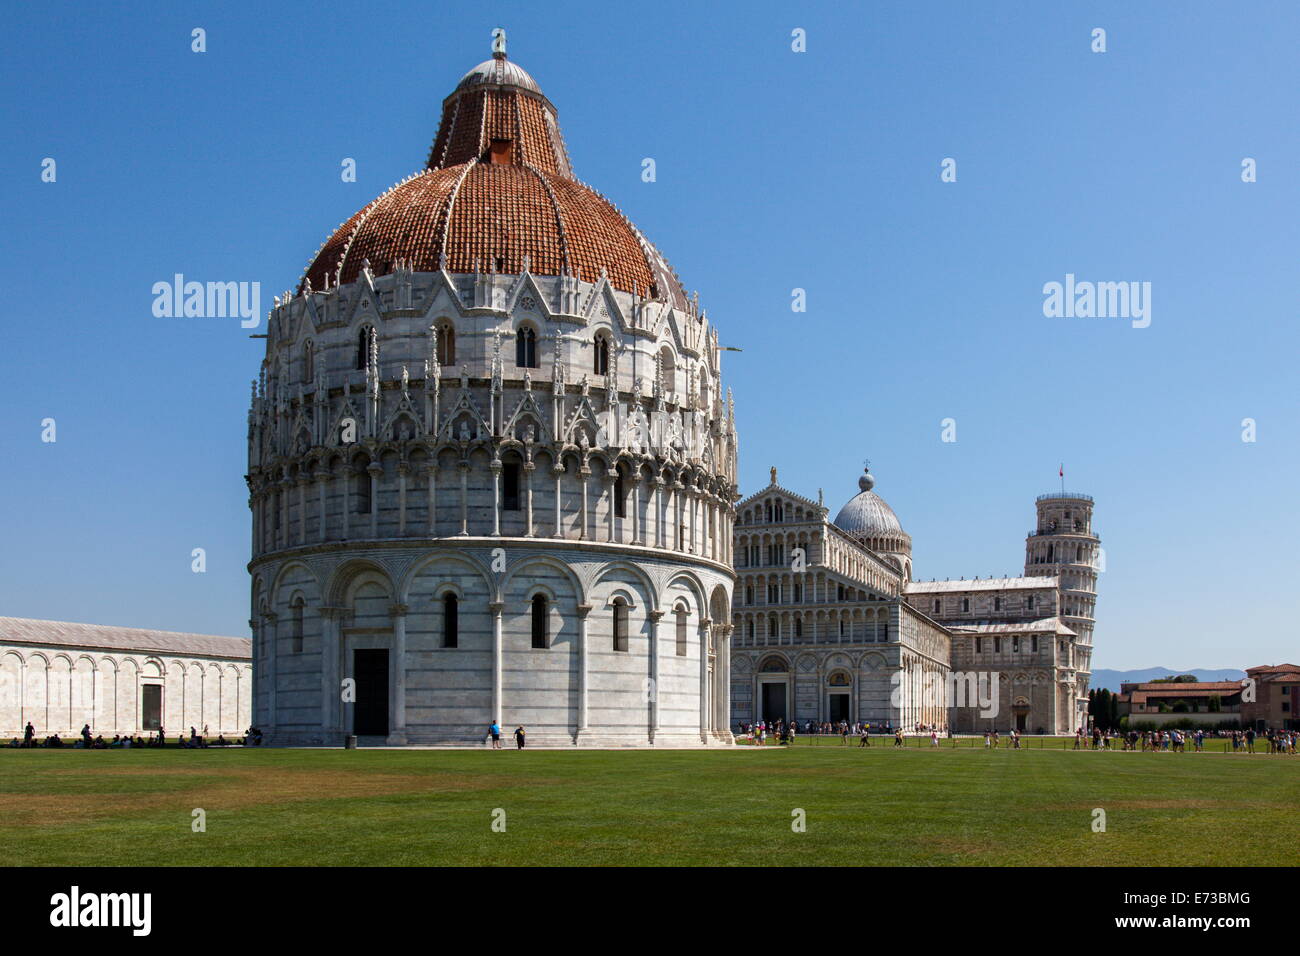 The Baptistery, Duomo and Leaning Tower, Piazza dei Miracoli, UNESCO World Heritage Site, Pisa, Tuscany, Italy, Europe Stock Photo